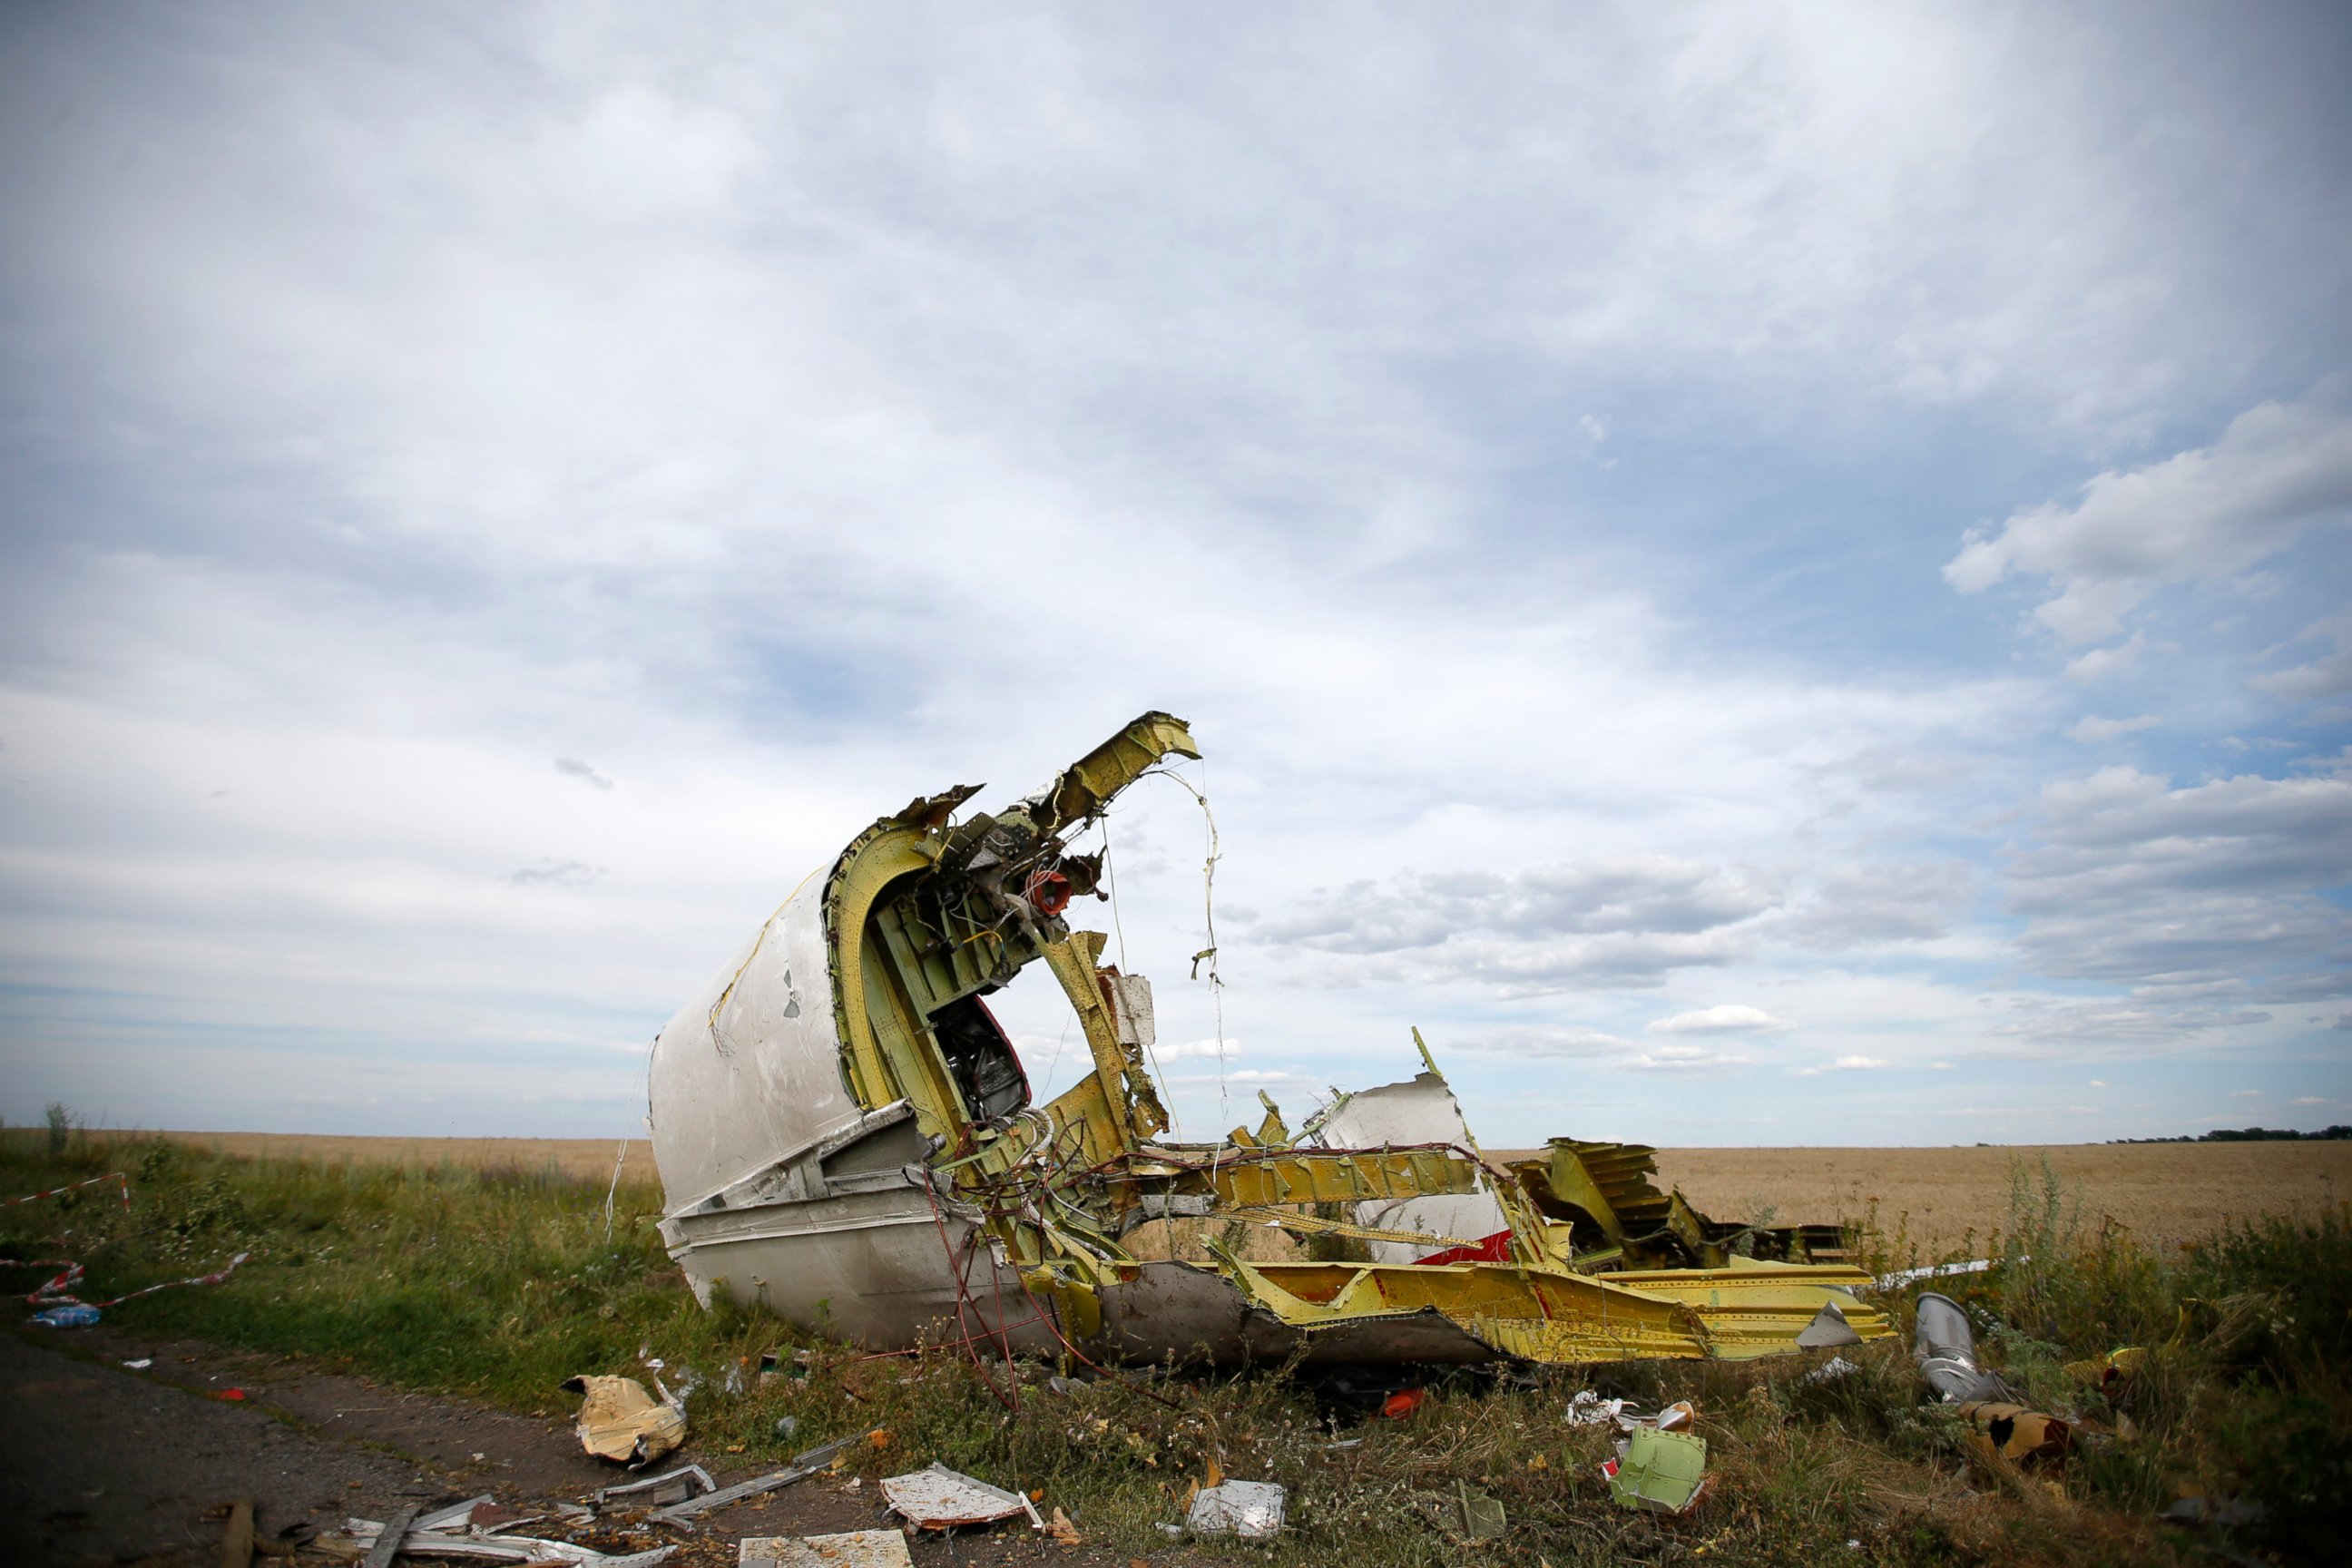 PHOTO: A part of the wreckage is seen at the crash site of the Malaysia Airlines Flight MH17 near the village of Hrabove (Grabovo), Ukraine, July 21, 2014. 